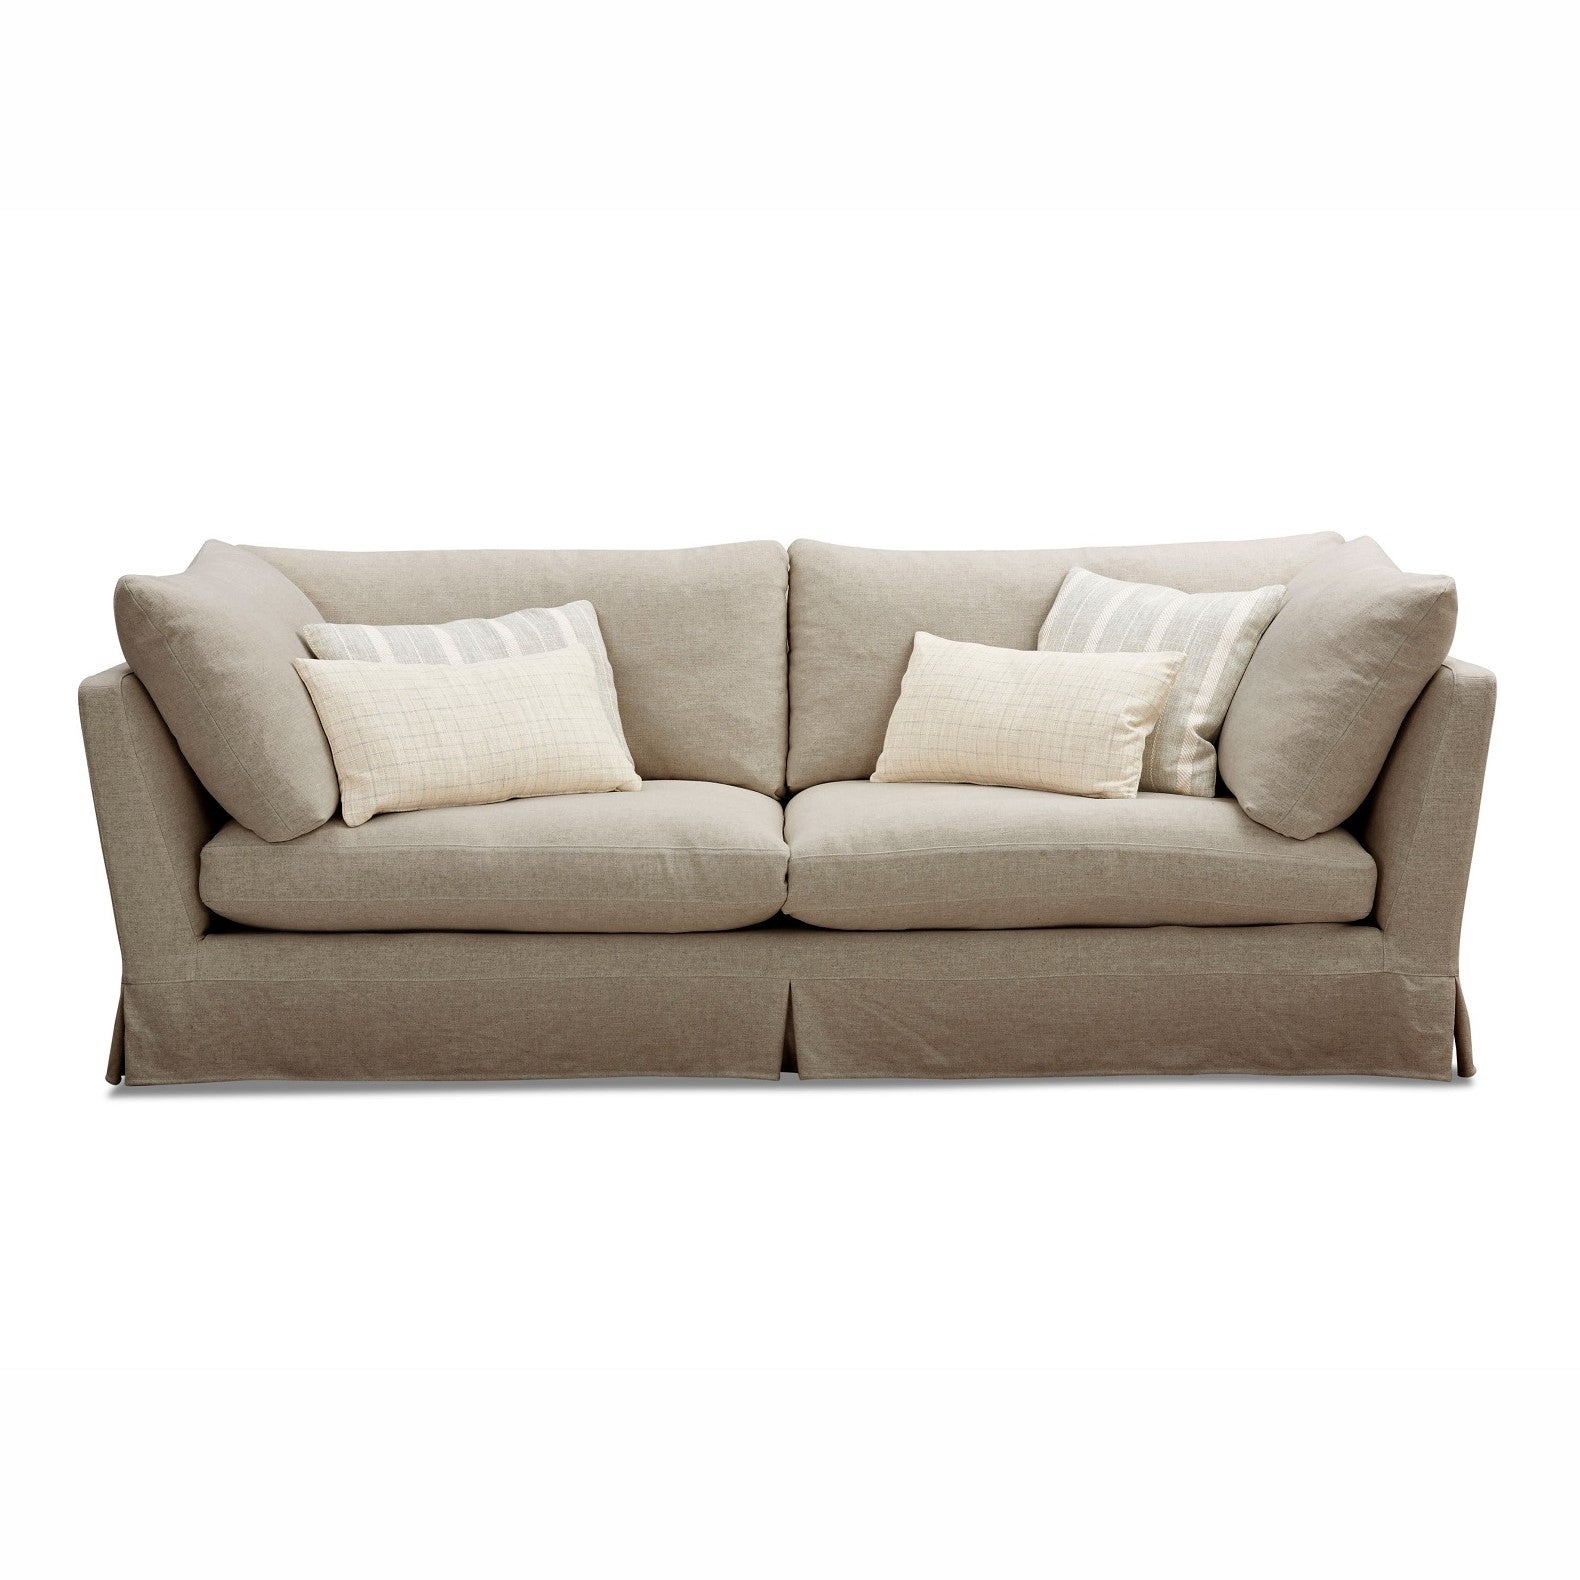 Lille Loose Cover Sofa by Molmic available from Make Your House A Home, Furniture Store located in Bendigo, Victoria. Australian Made in Melbourne.